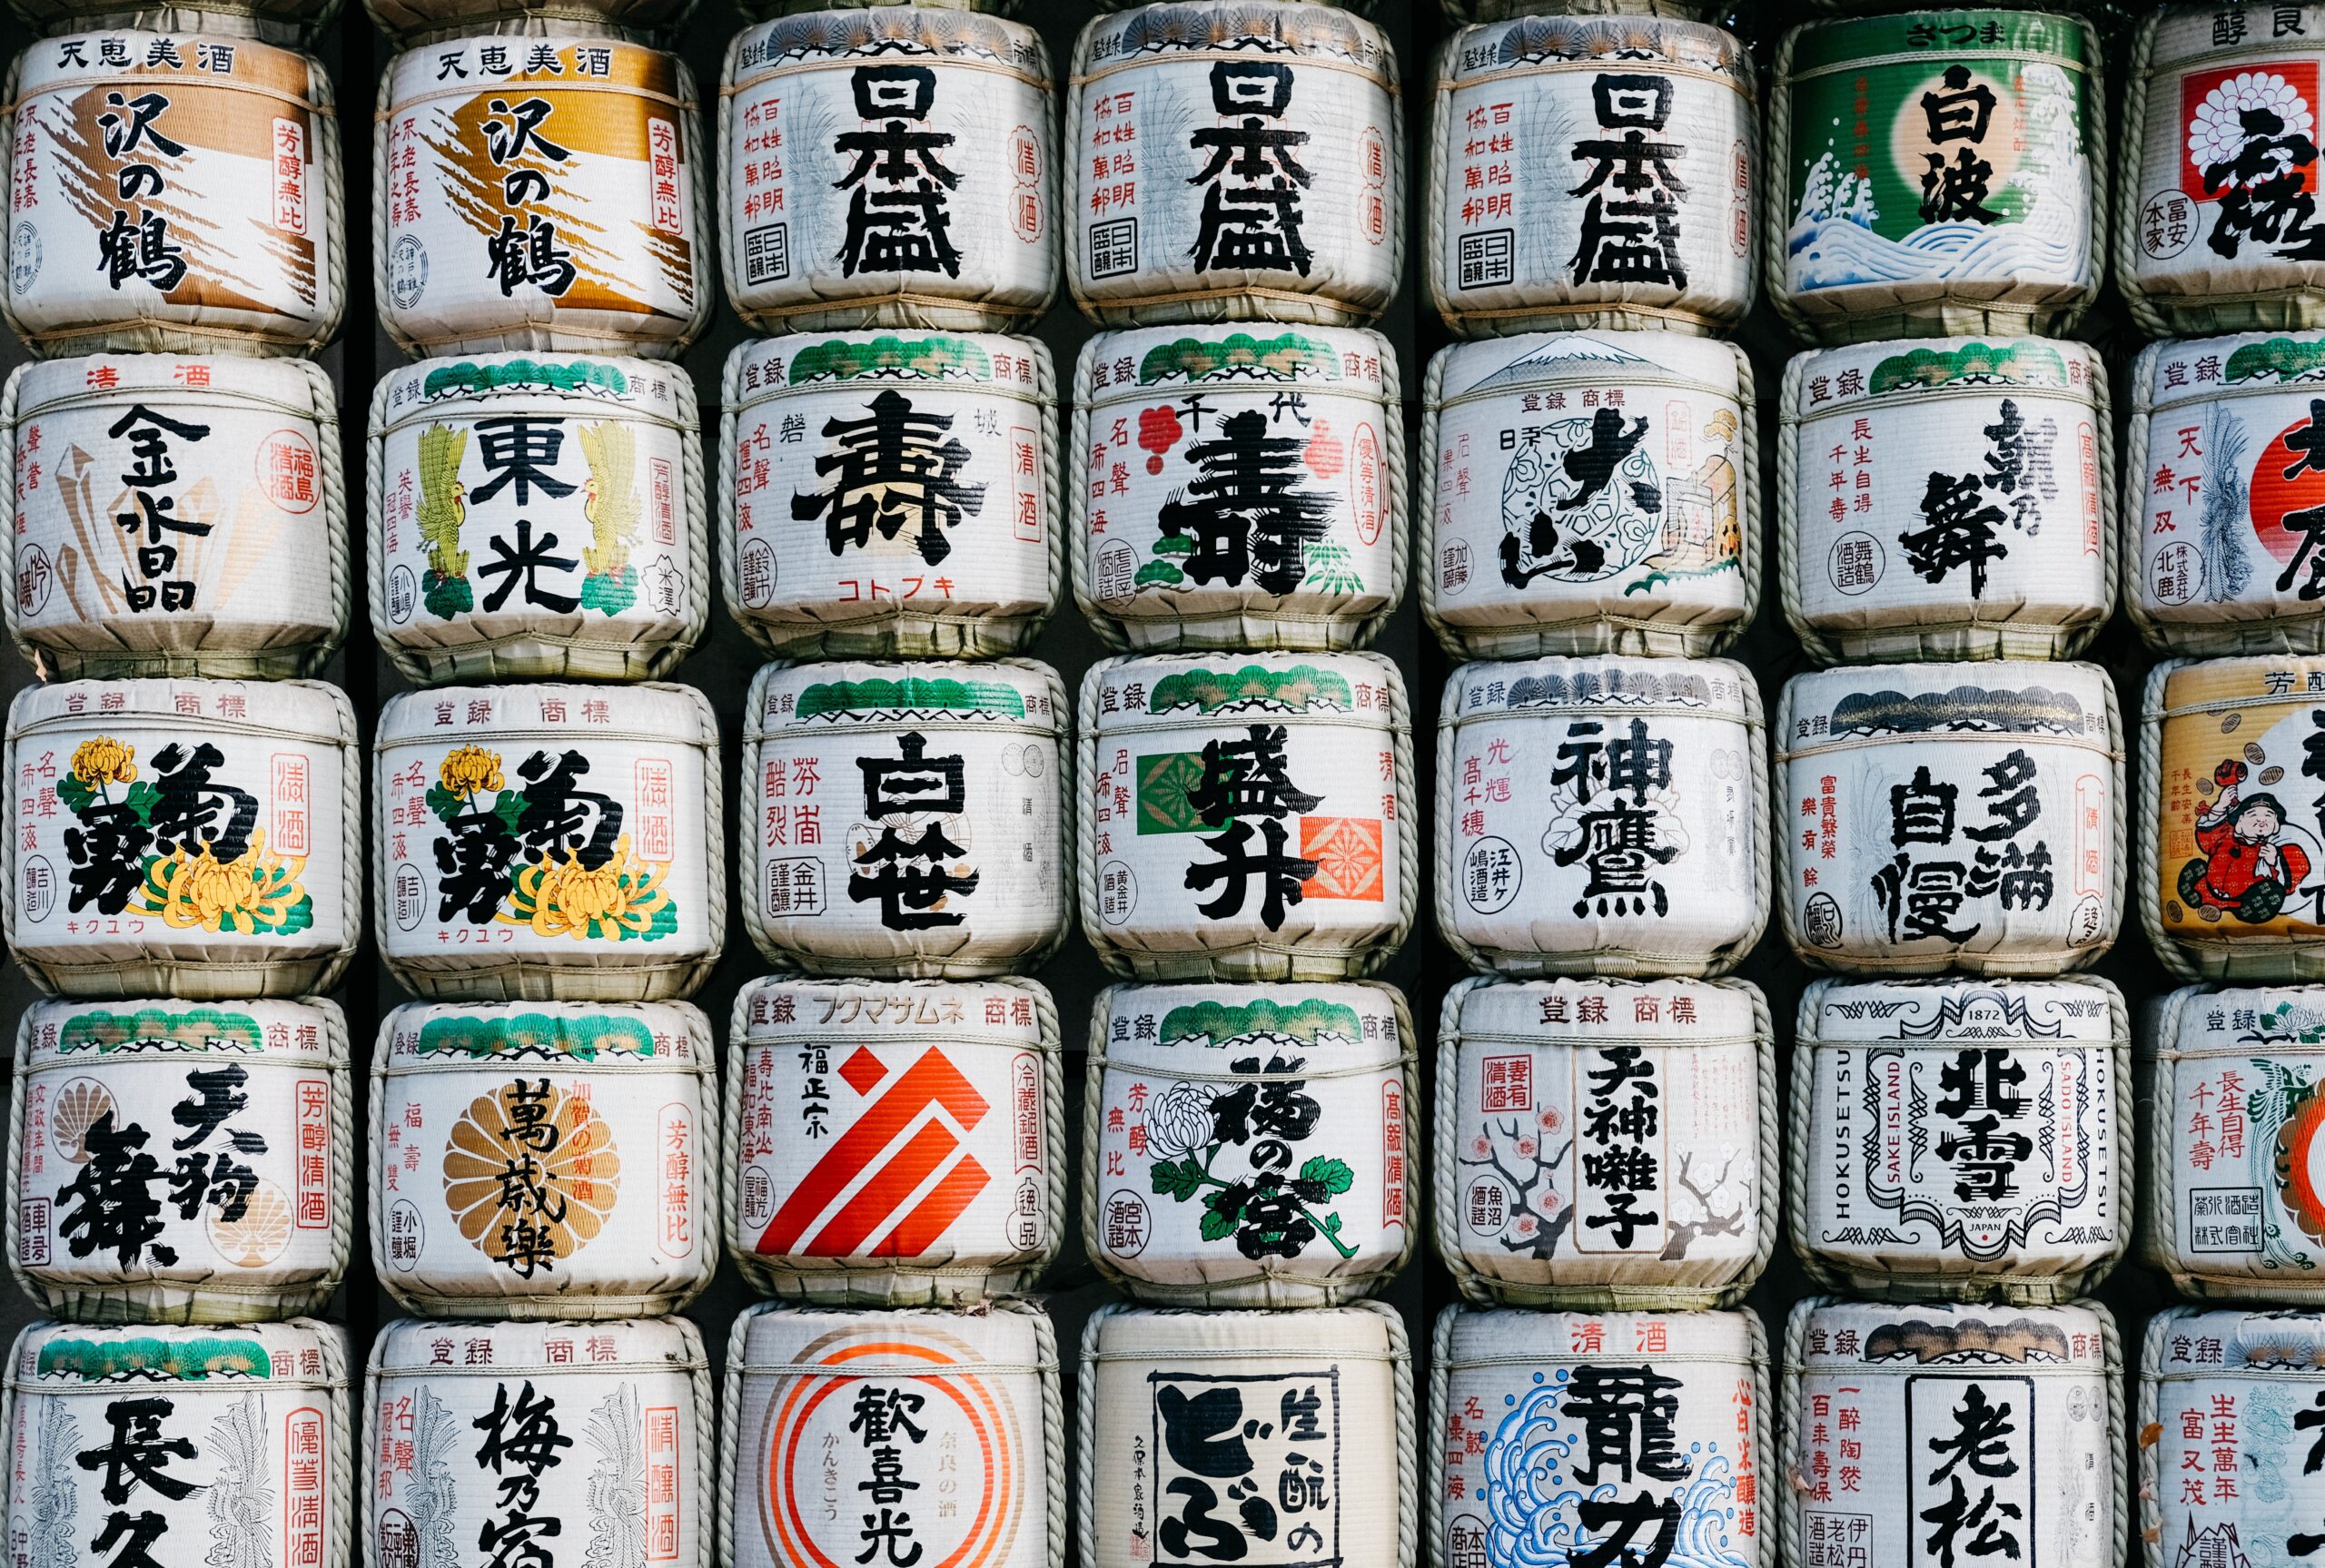 Photograph of large rice basket containers stacked up in a wall-like fashion.